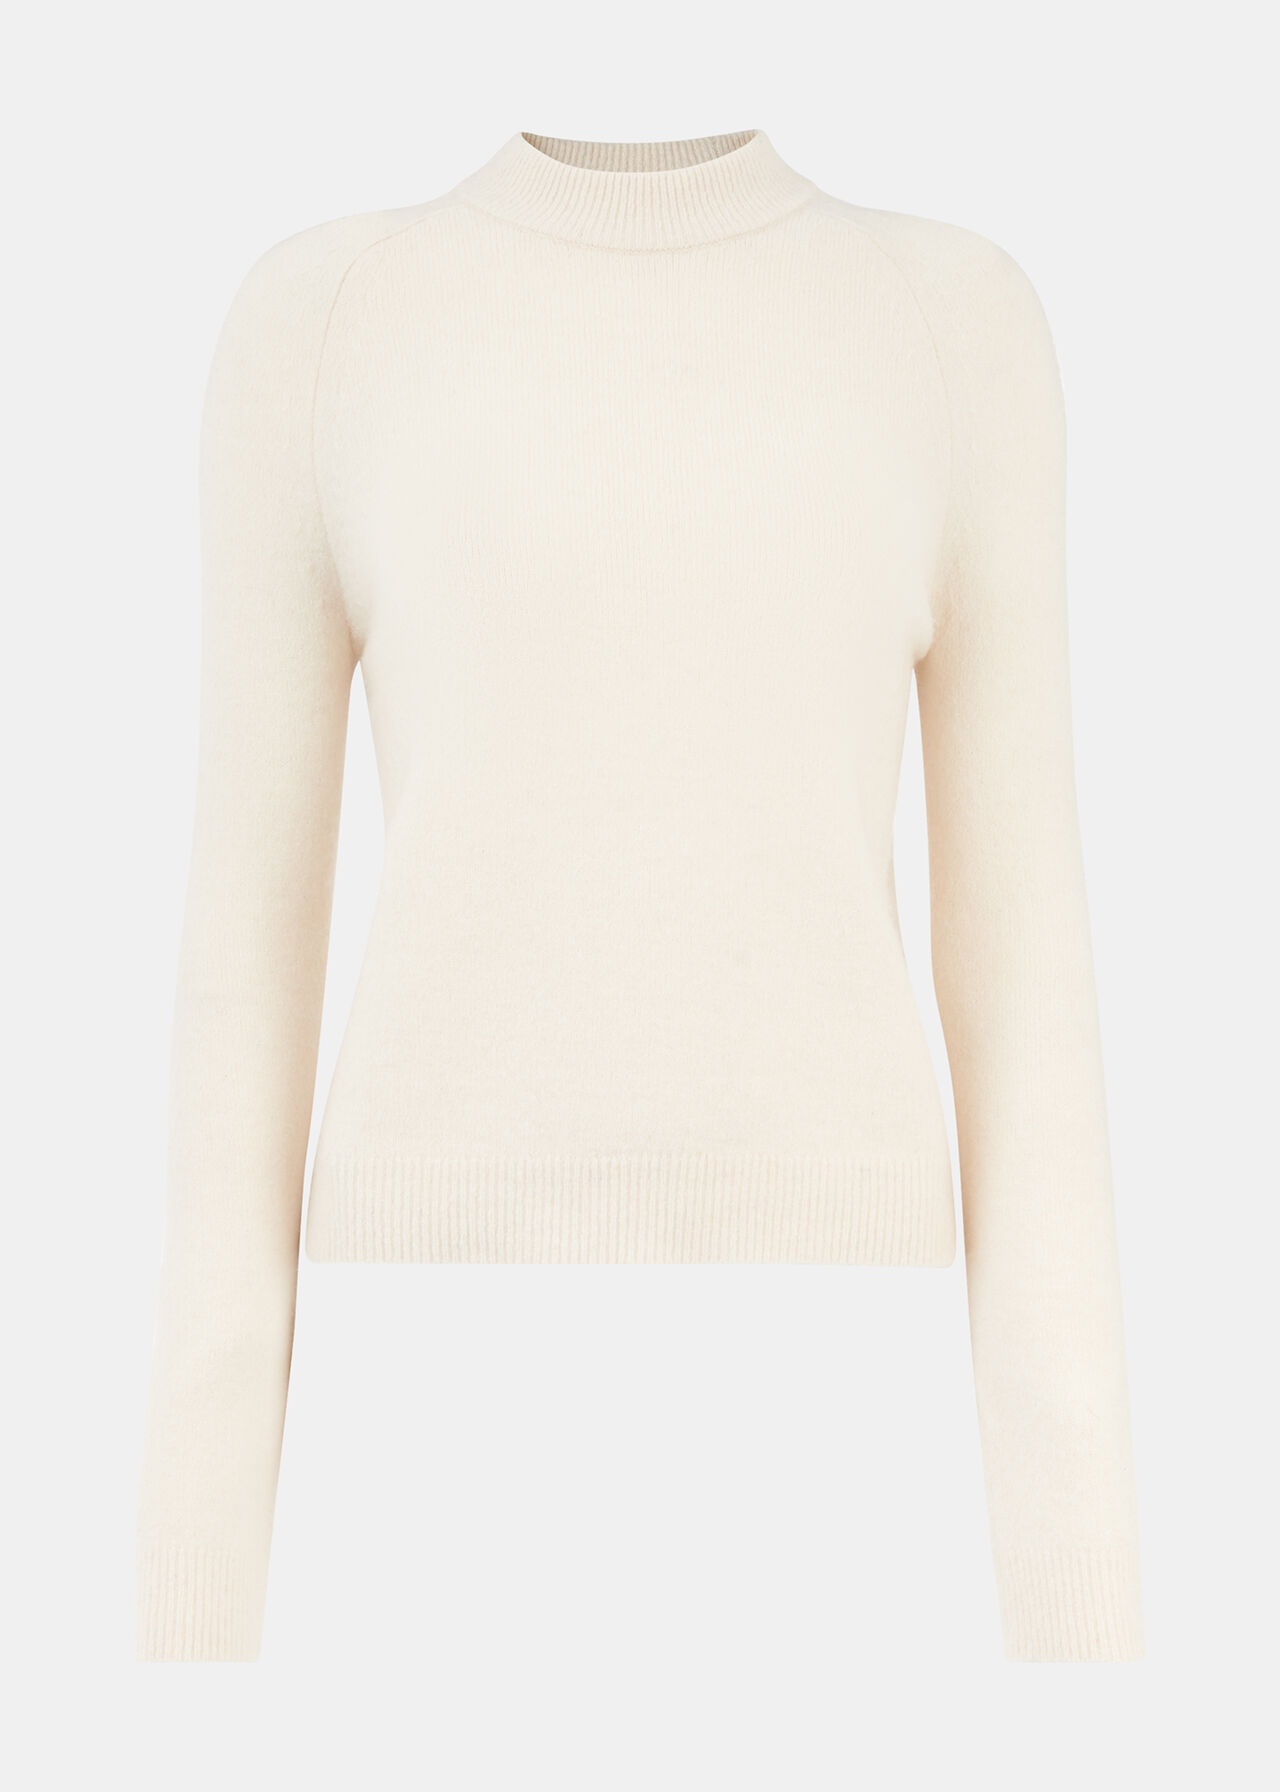 Ivory Wool Textured Crew Neck Knit | WHISTLES